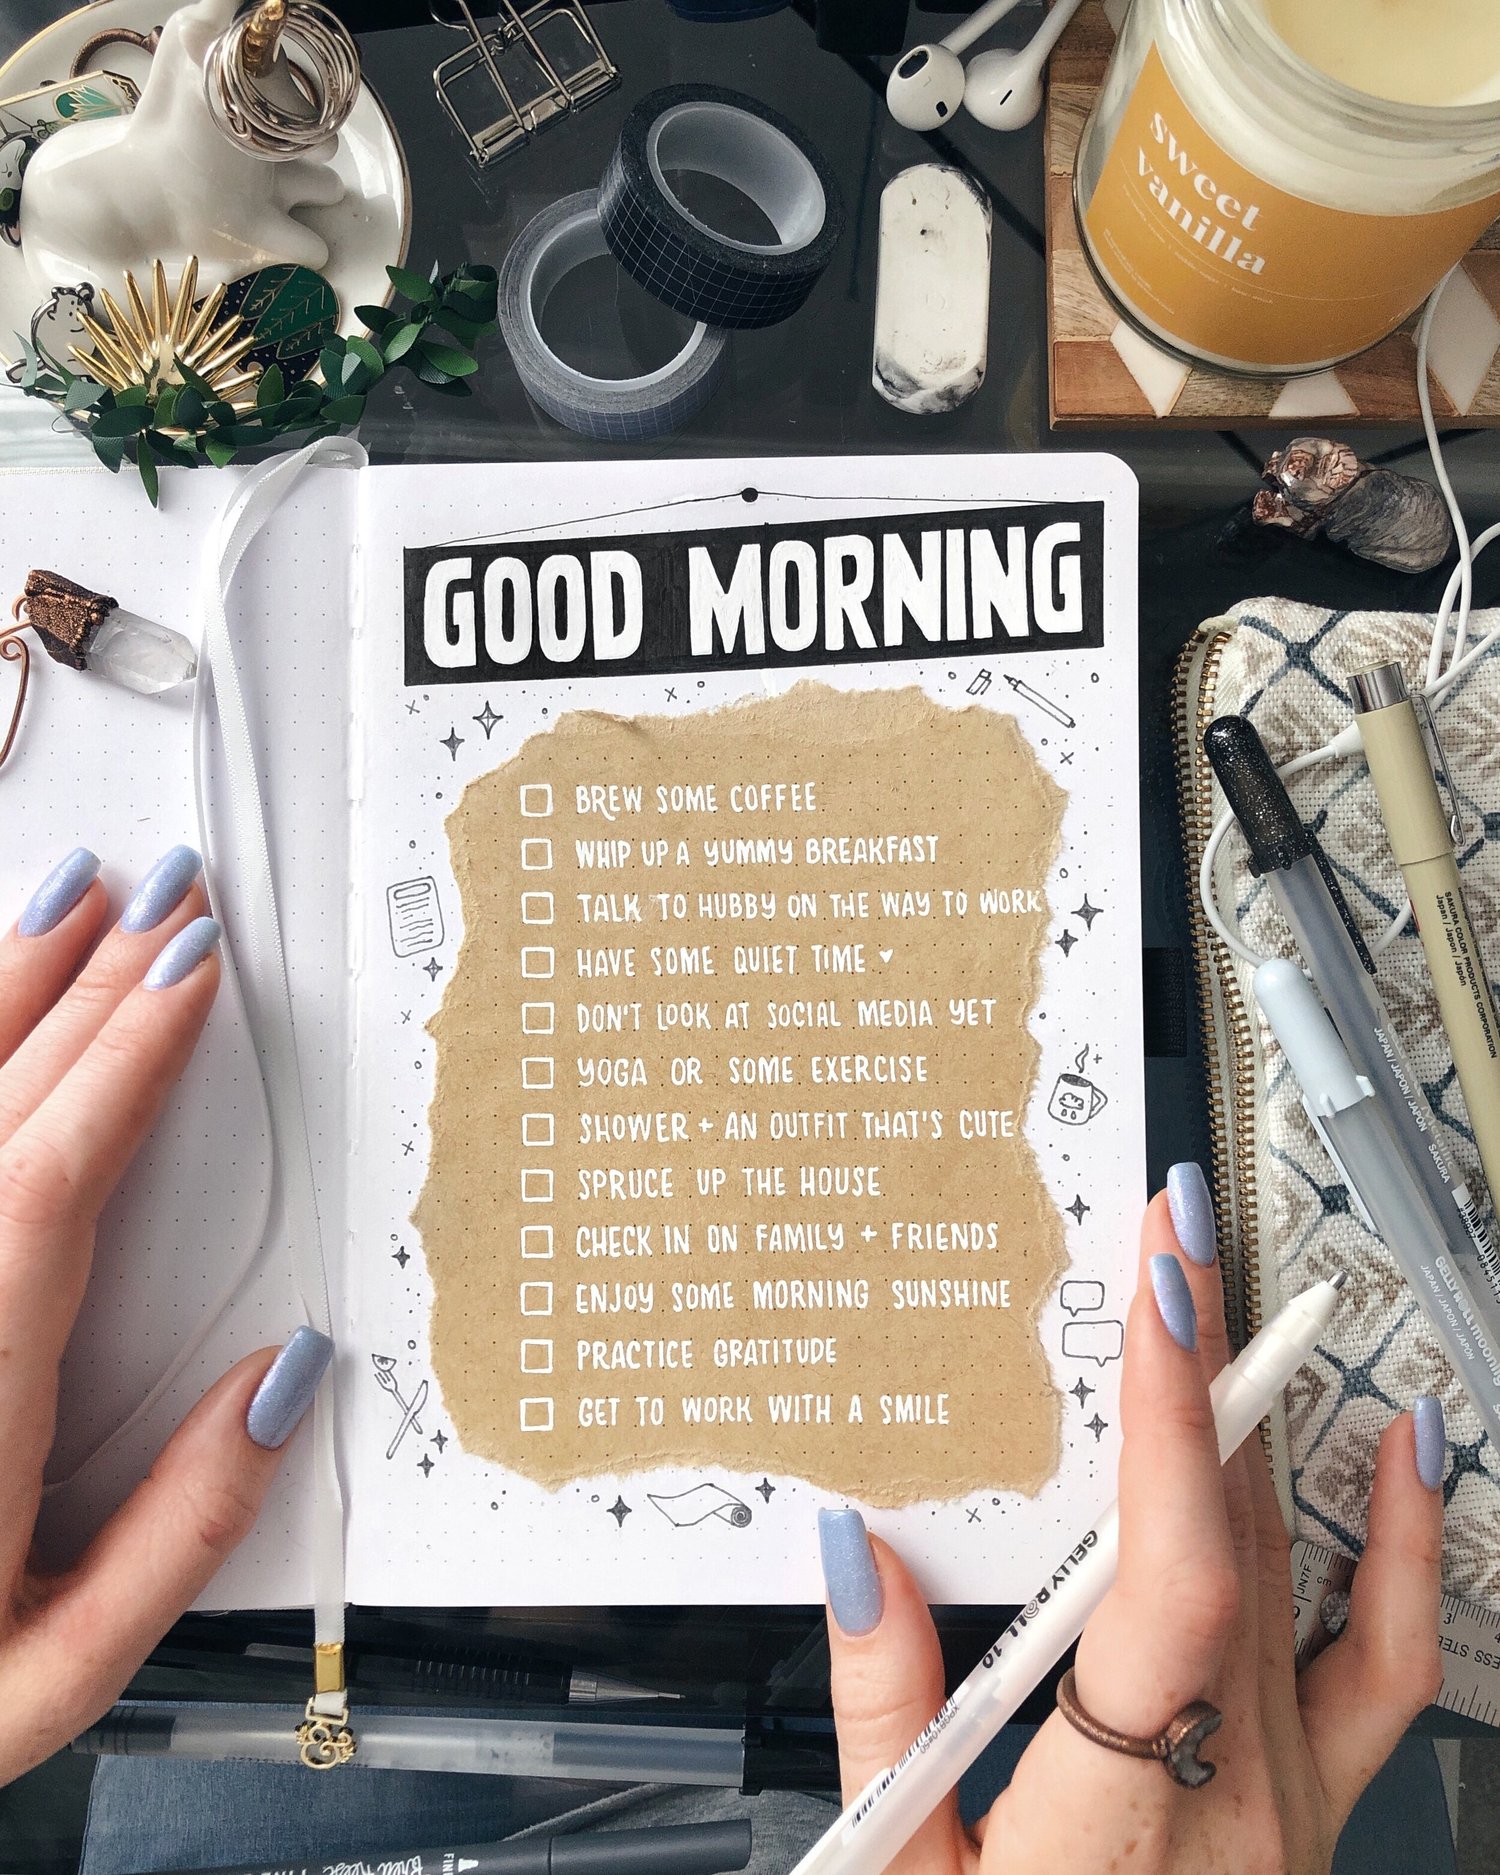 10 Tips To Help You Keep Up With Bullet Journaling Every Day